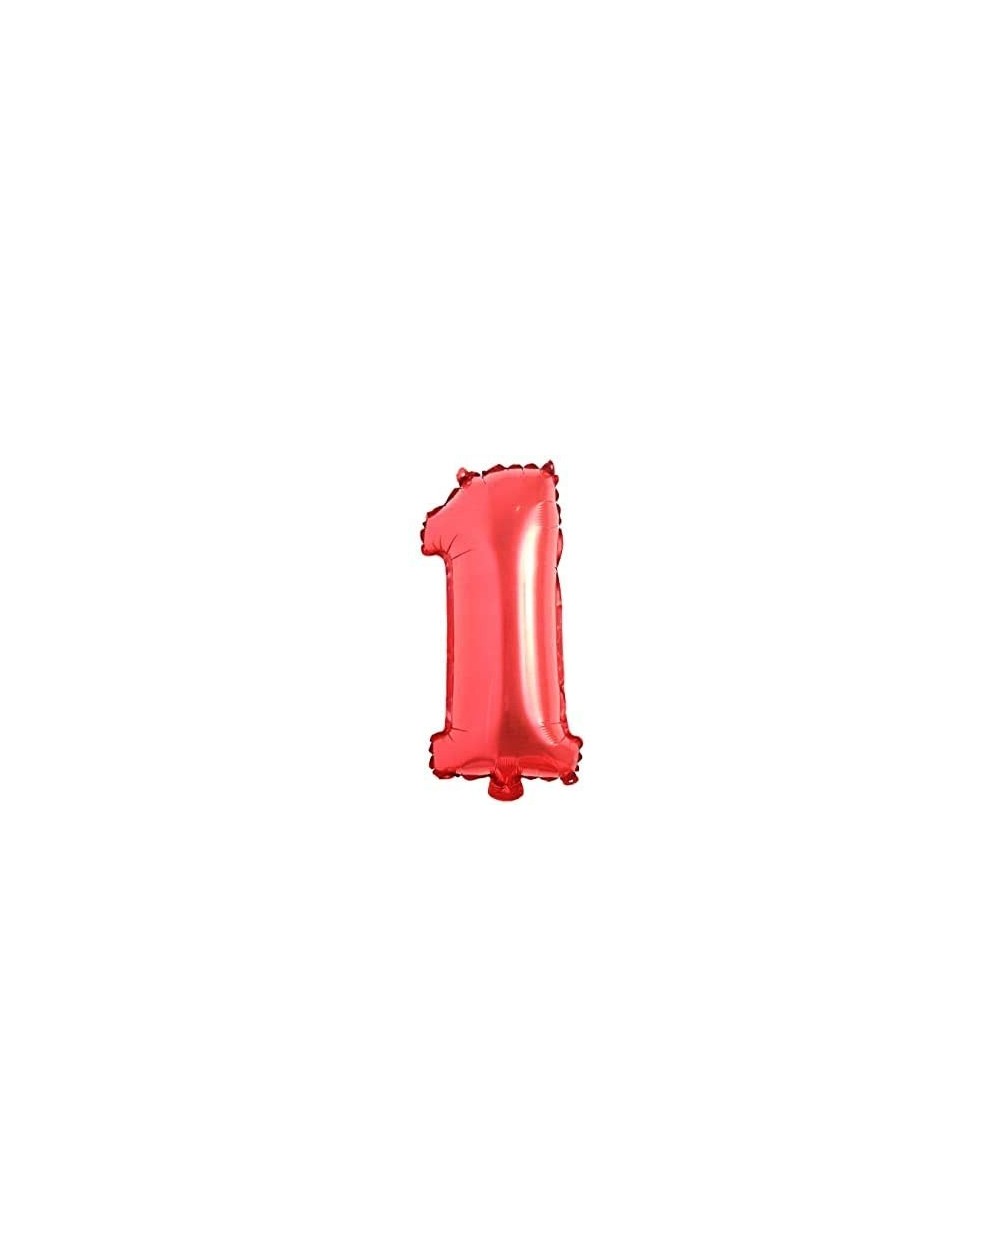 Balloons 32 inch Red Number 1 Balloon - CM19E5N5NW4 $7.85